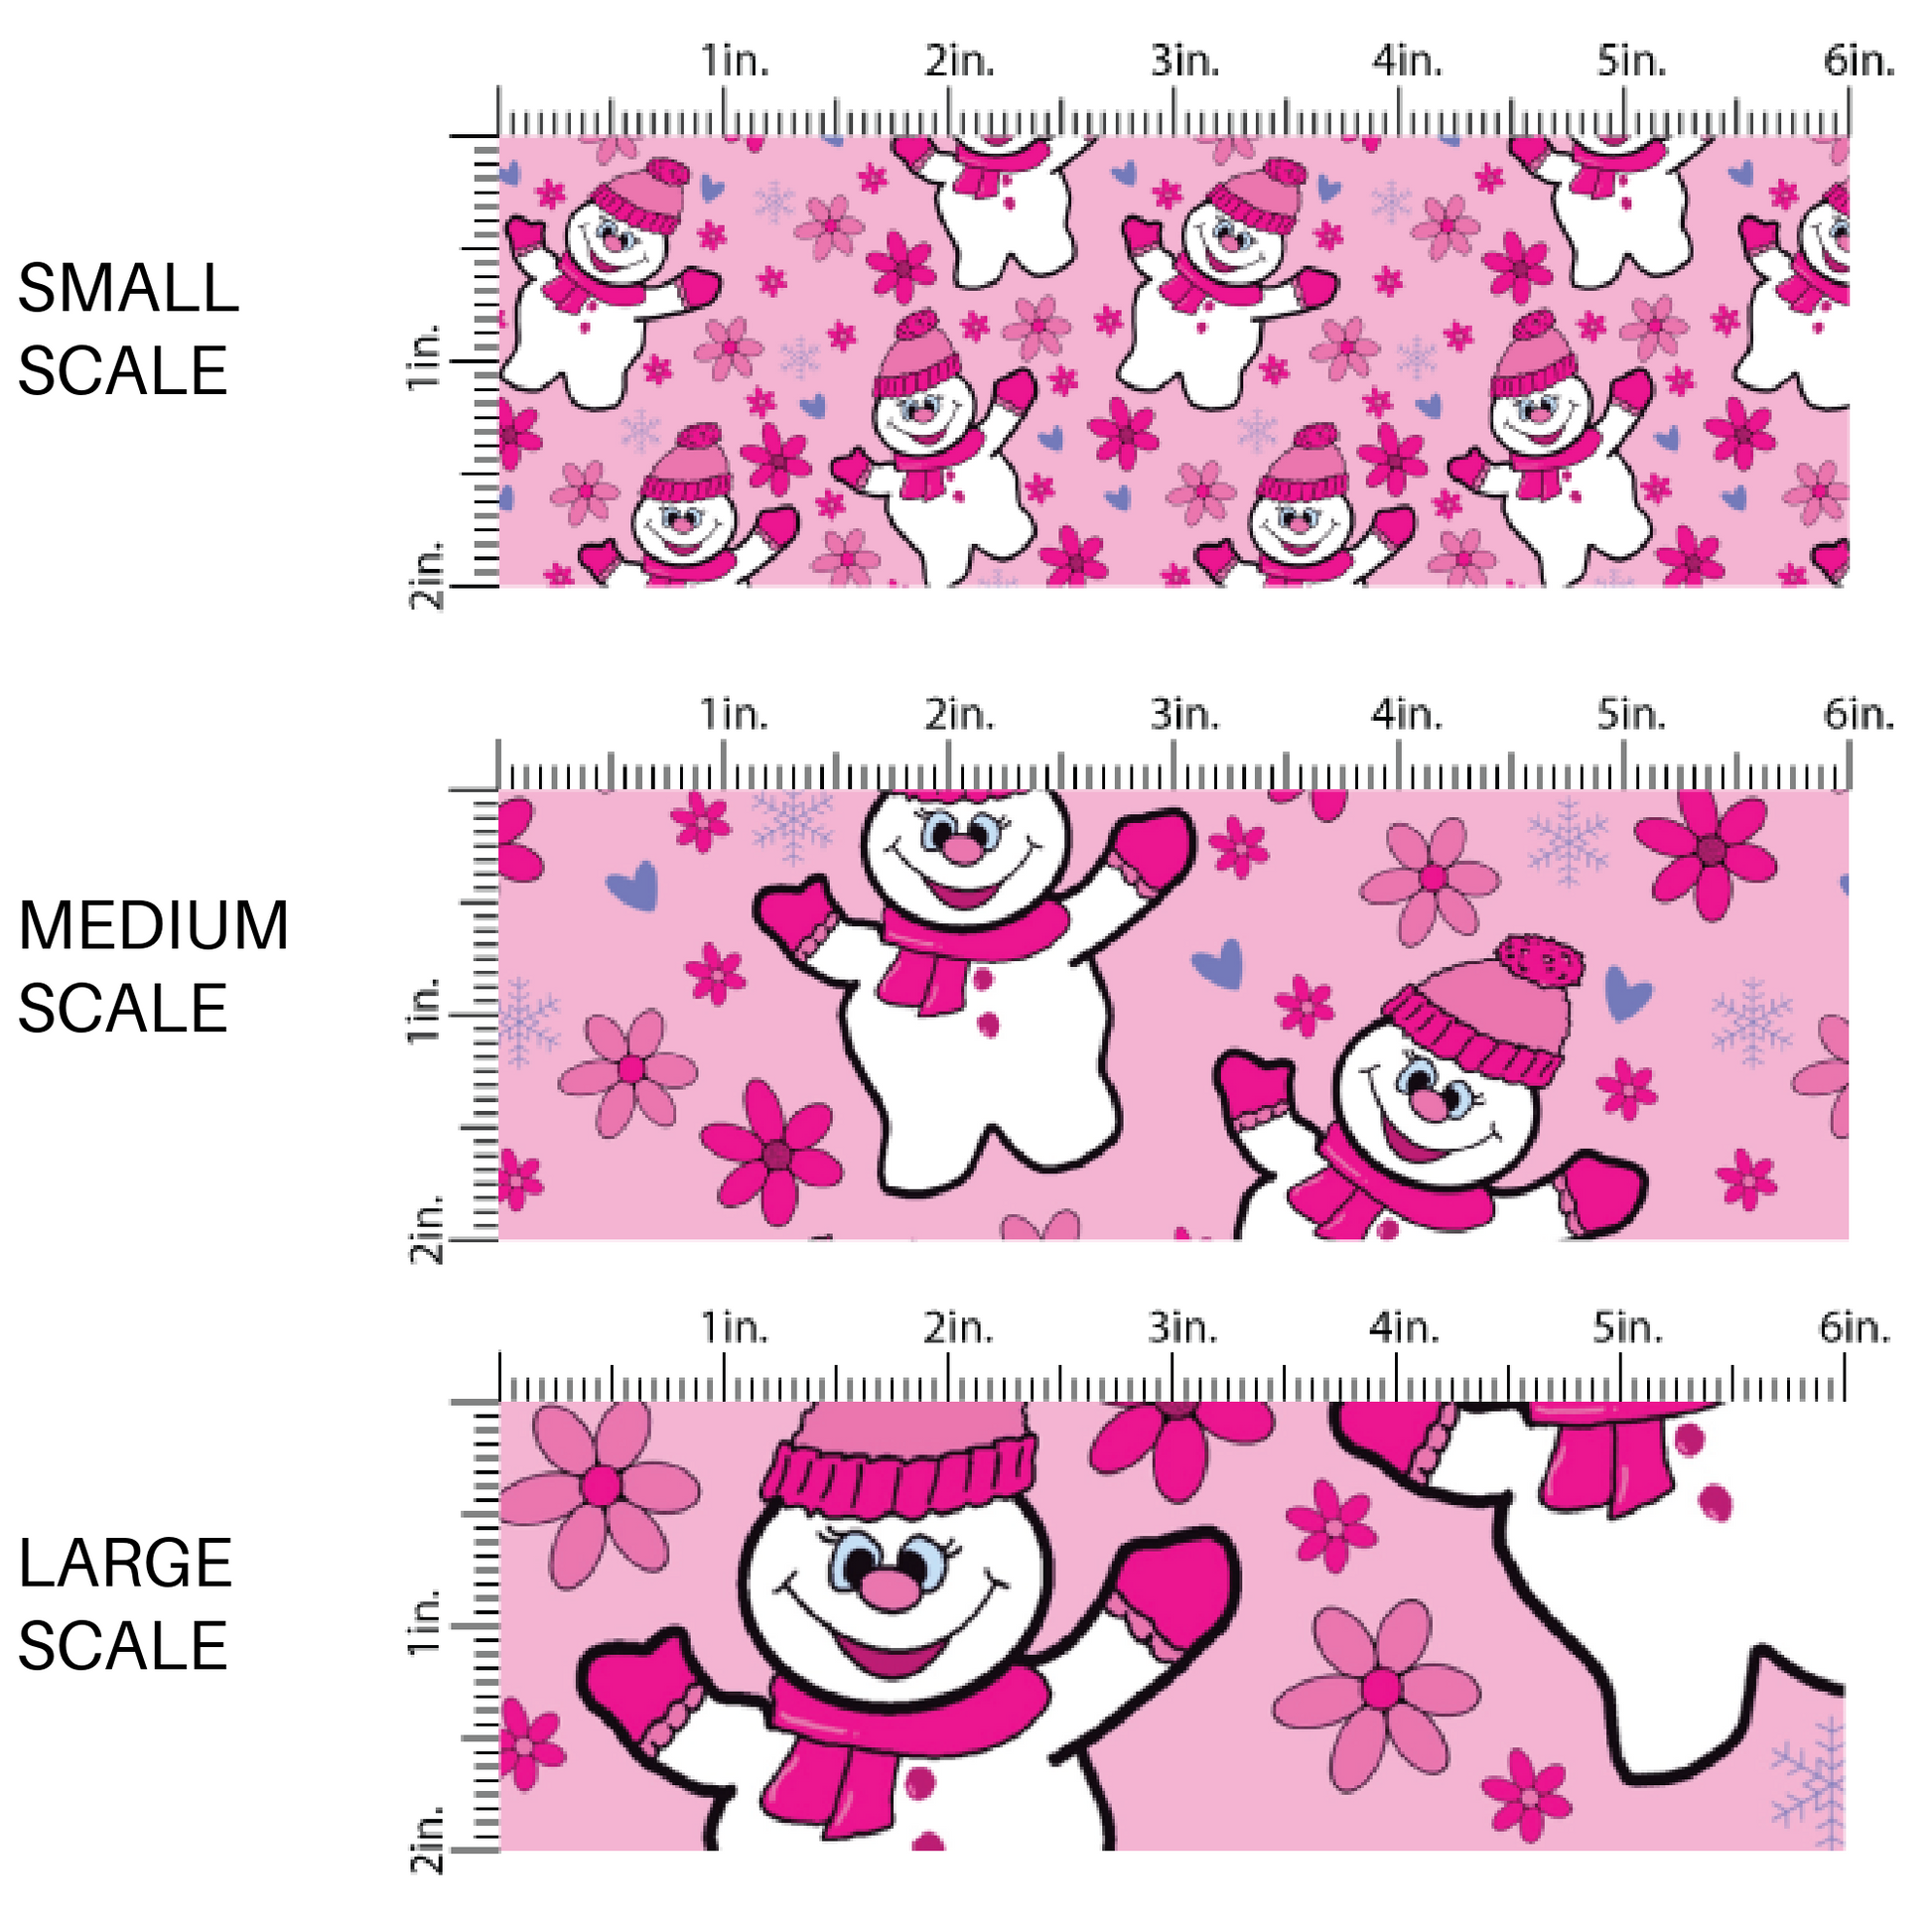 Pink fabric by the yard scaled image guide with snow-girls, florals, and hearts.